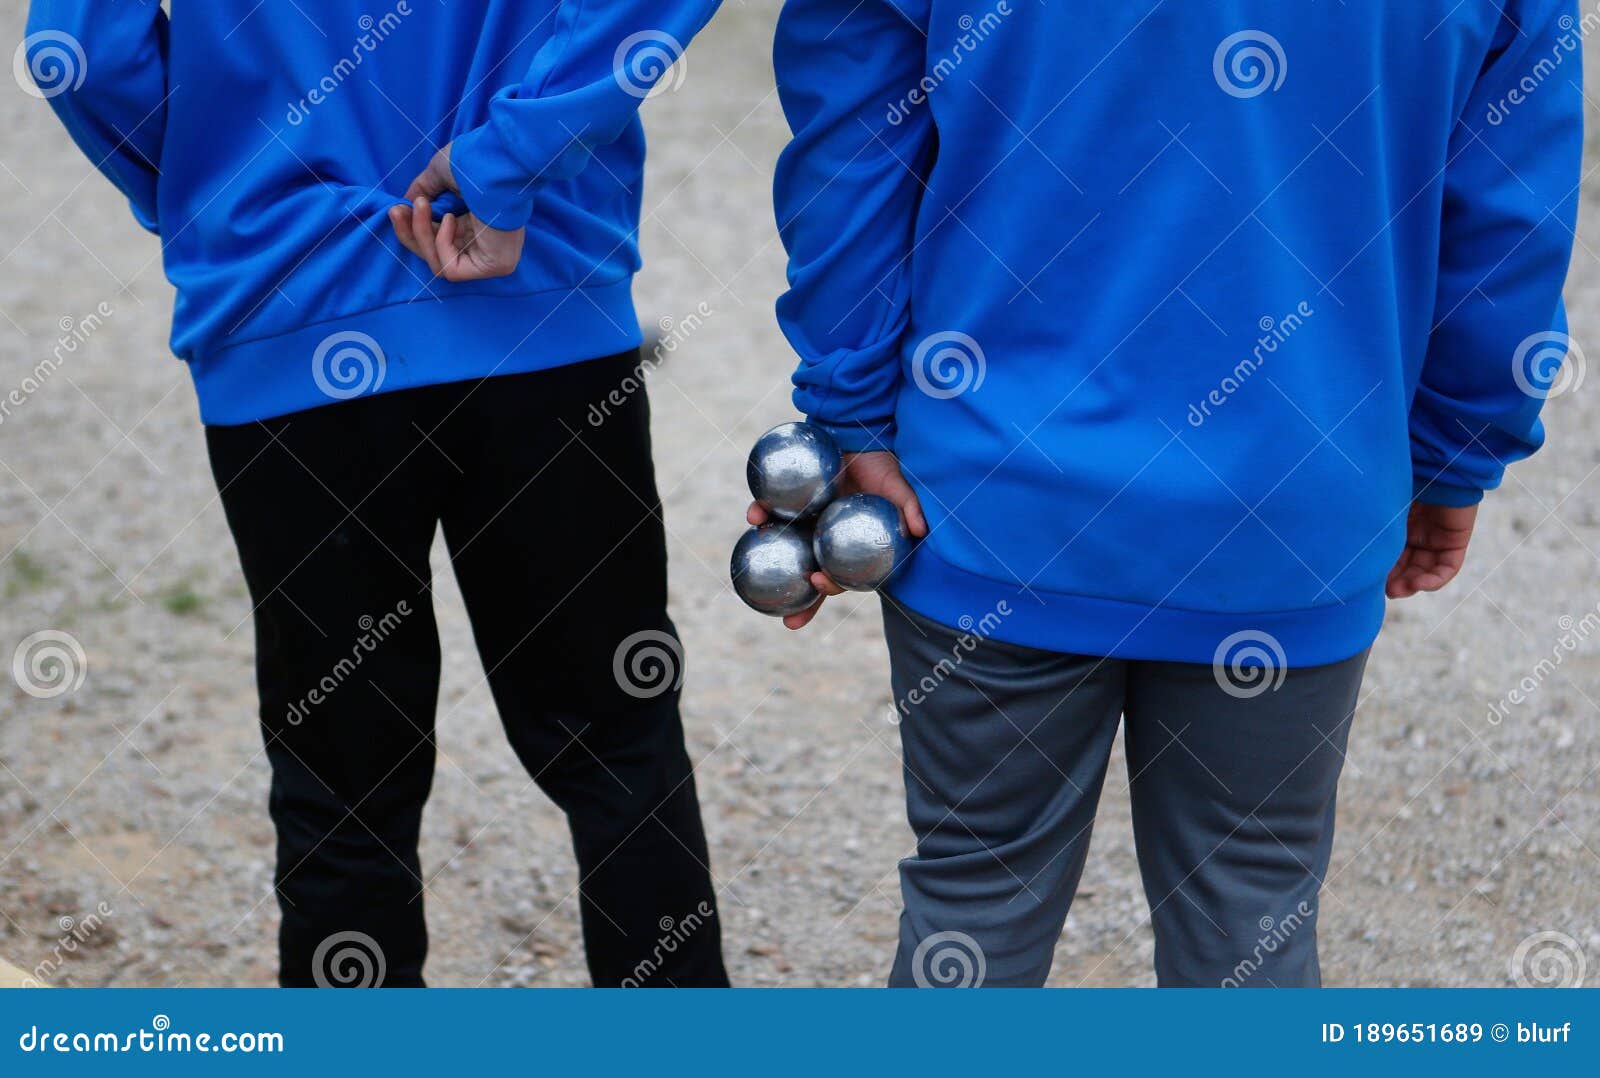 petanque throwers seen from back